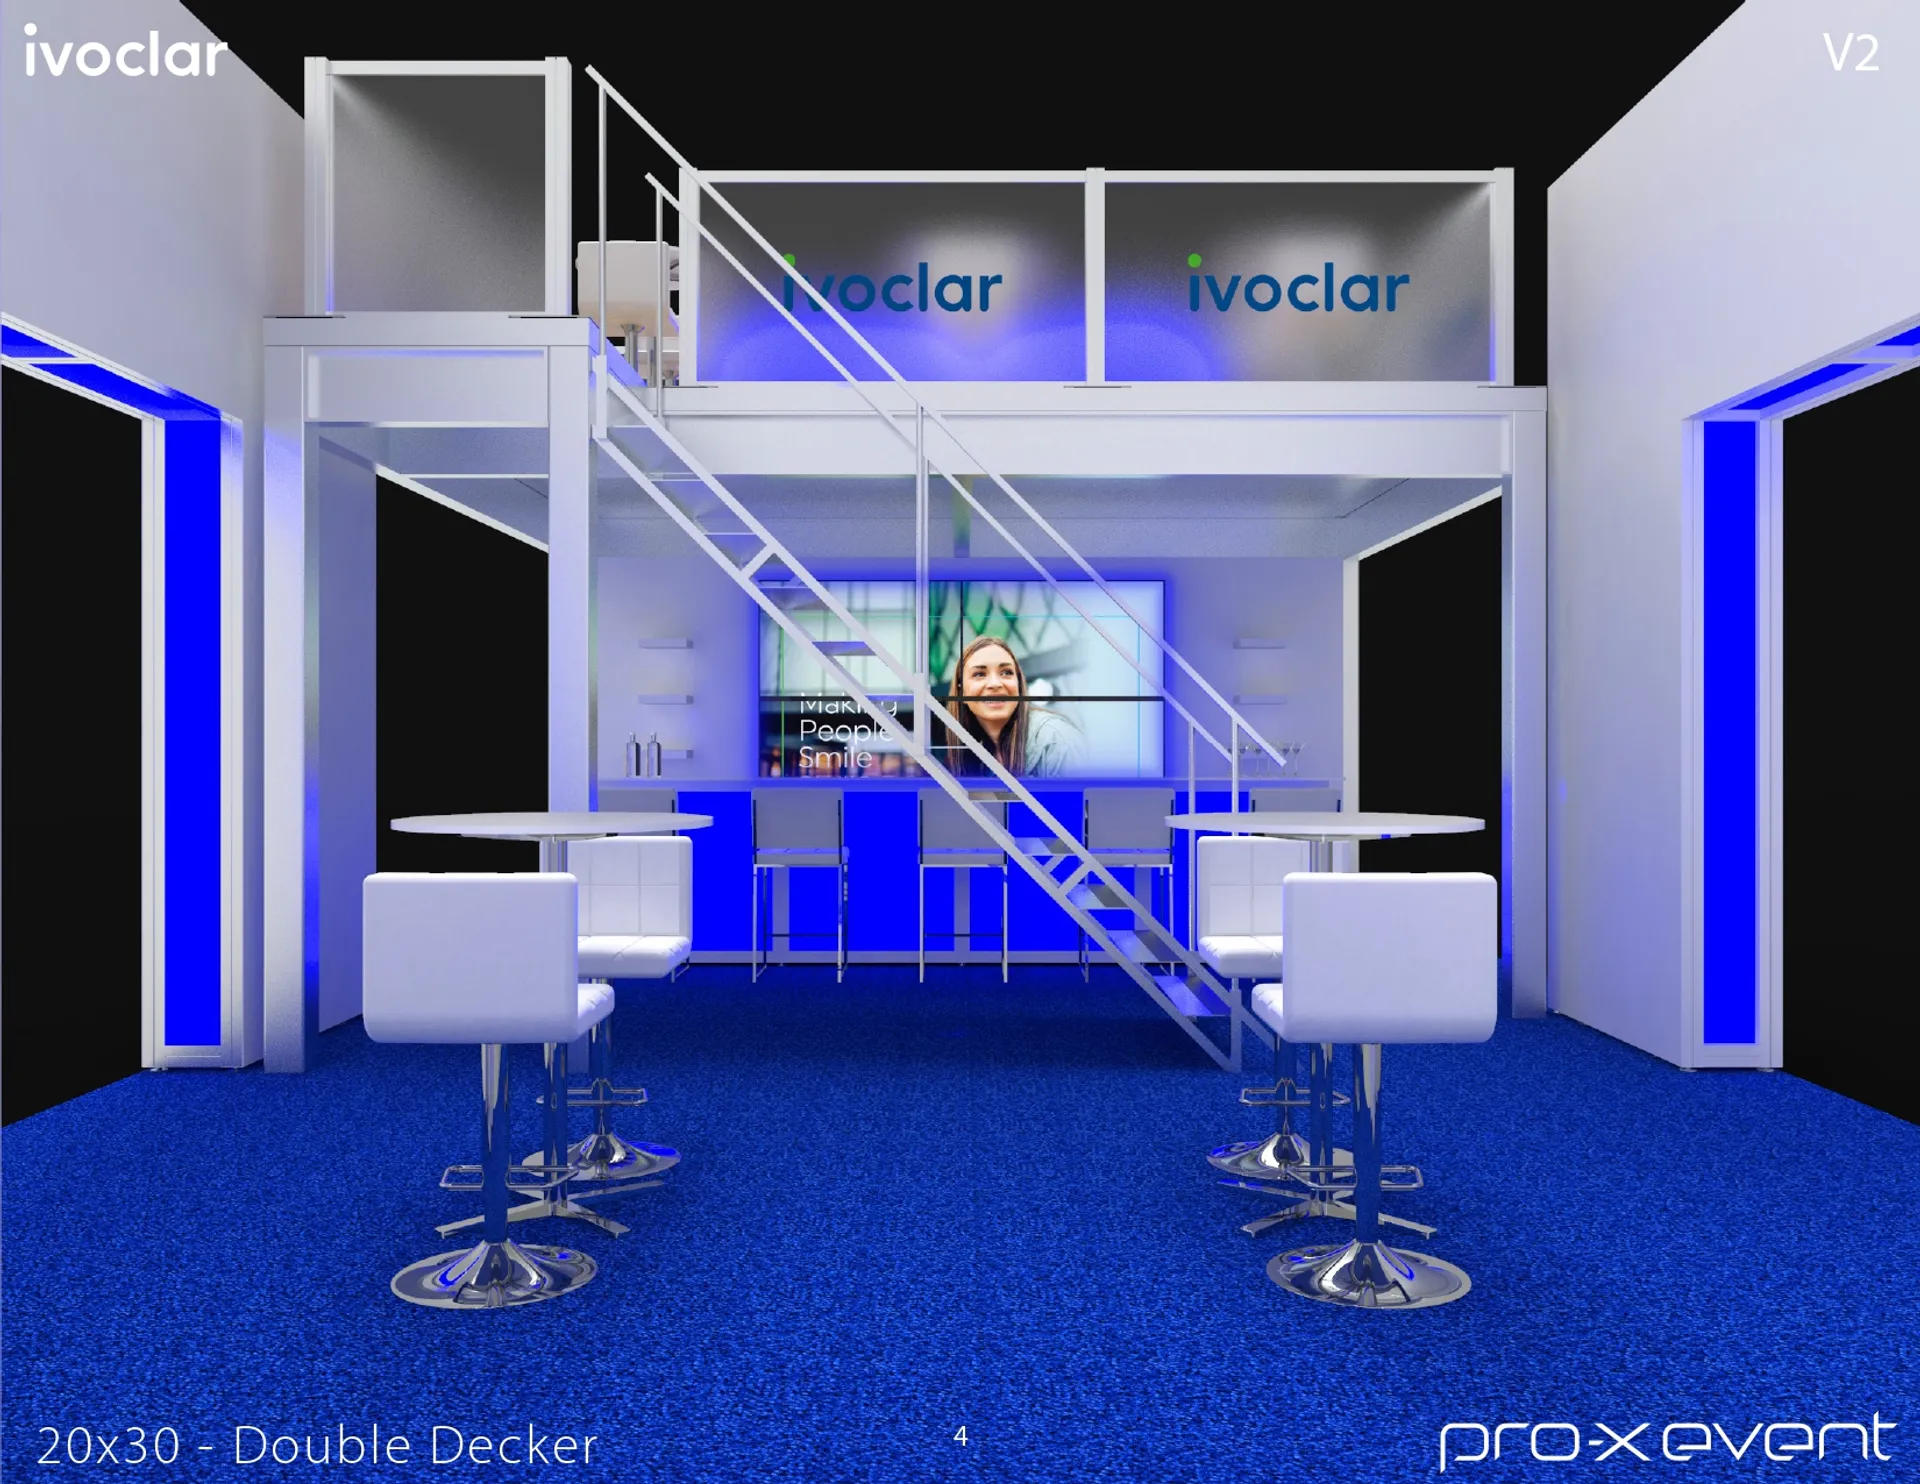 booth-design-projects/Pro-X Exhibits/2024-04-11-20x30-ISLAND-Project-55/IVOCLAR_20x30_DOUBLE DECKER_2022_V2-4_page-0001-rhgp1.jpg